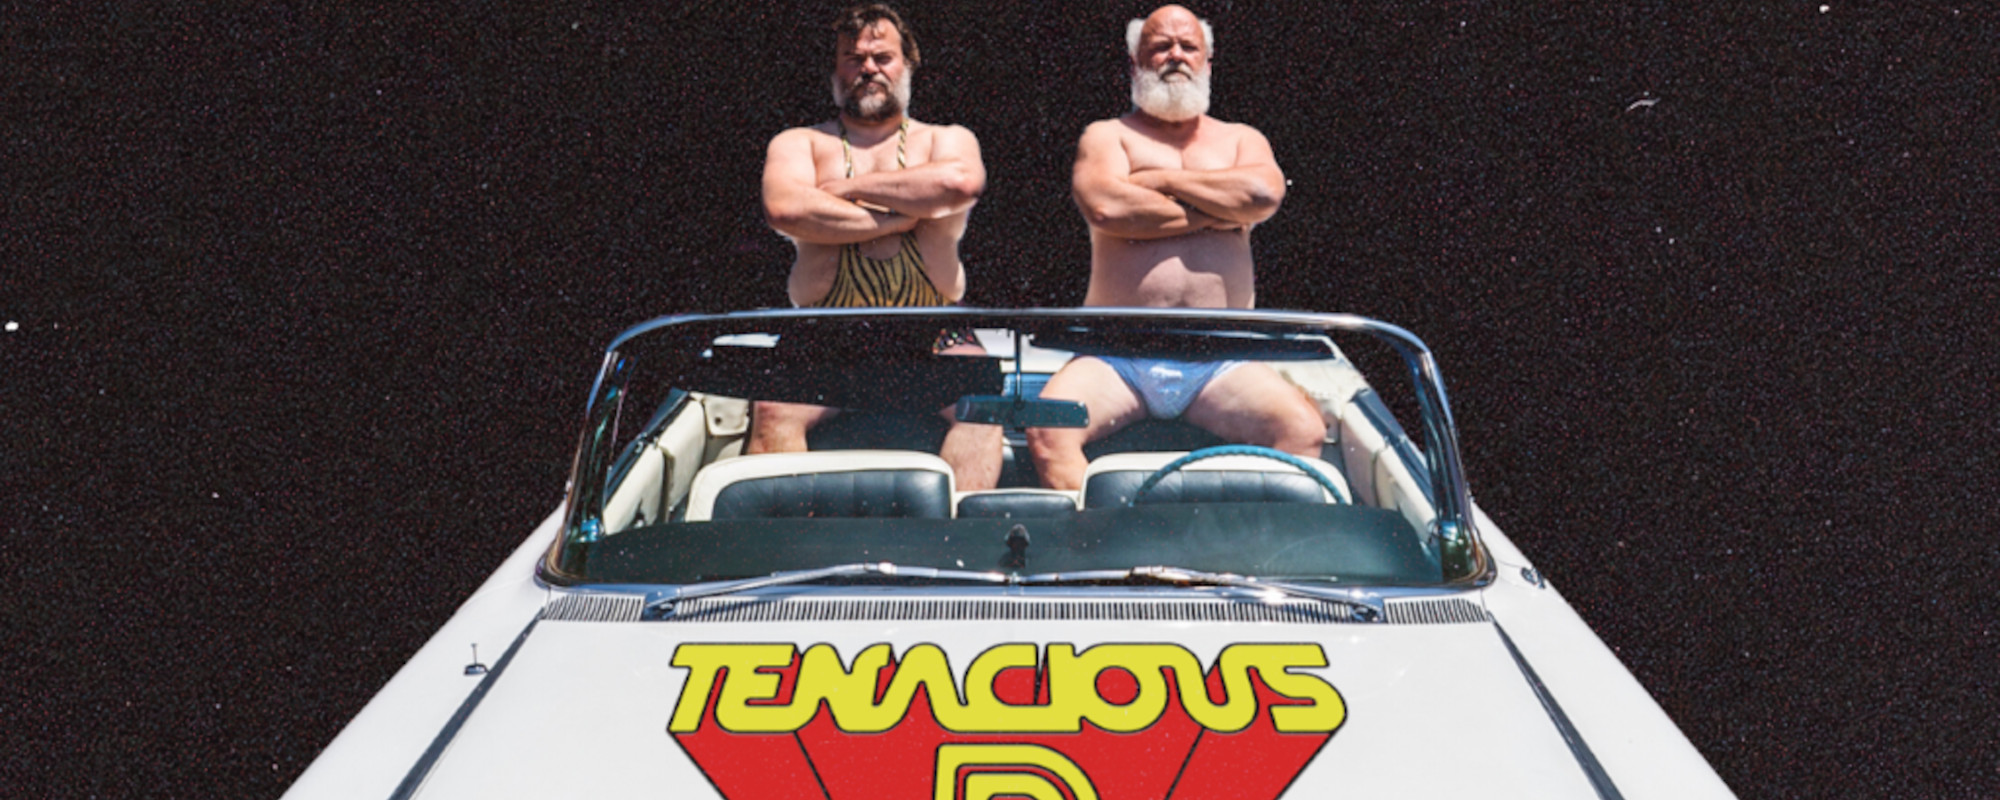 Tenacious D to Release New Audible Original ‘The Road to Redunktion’